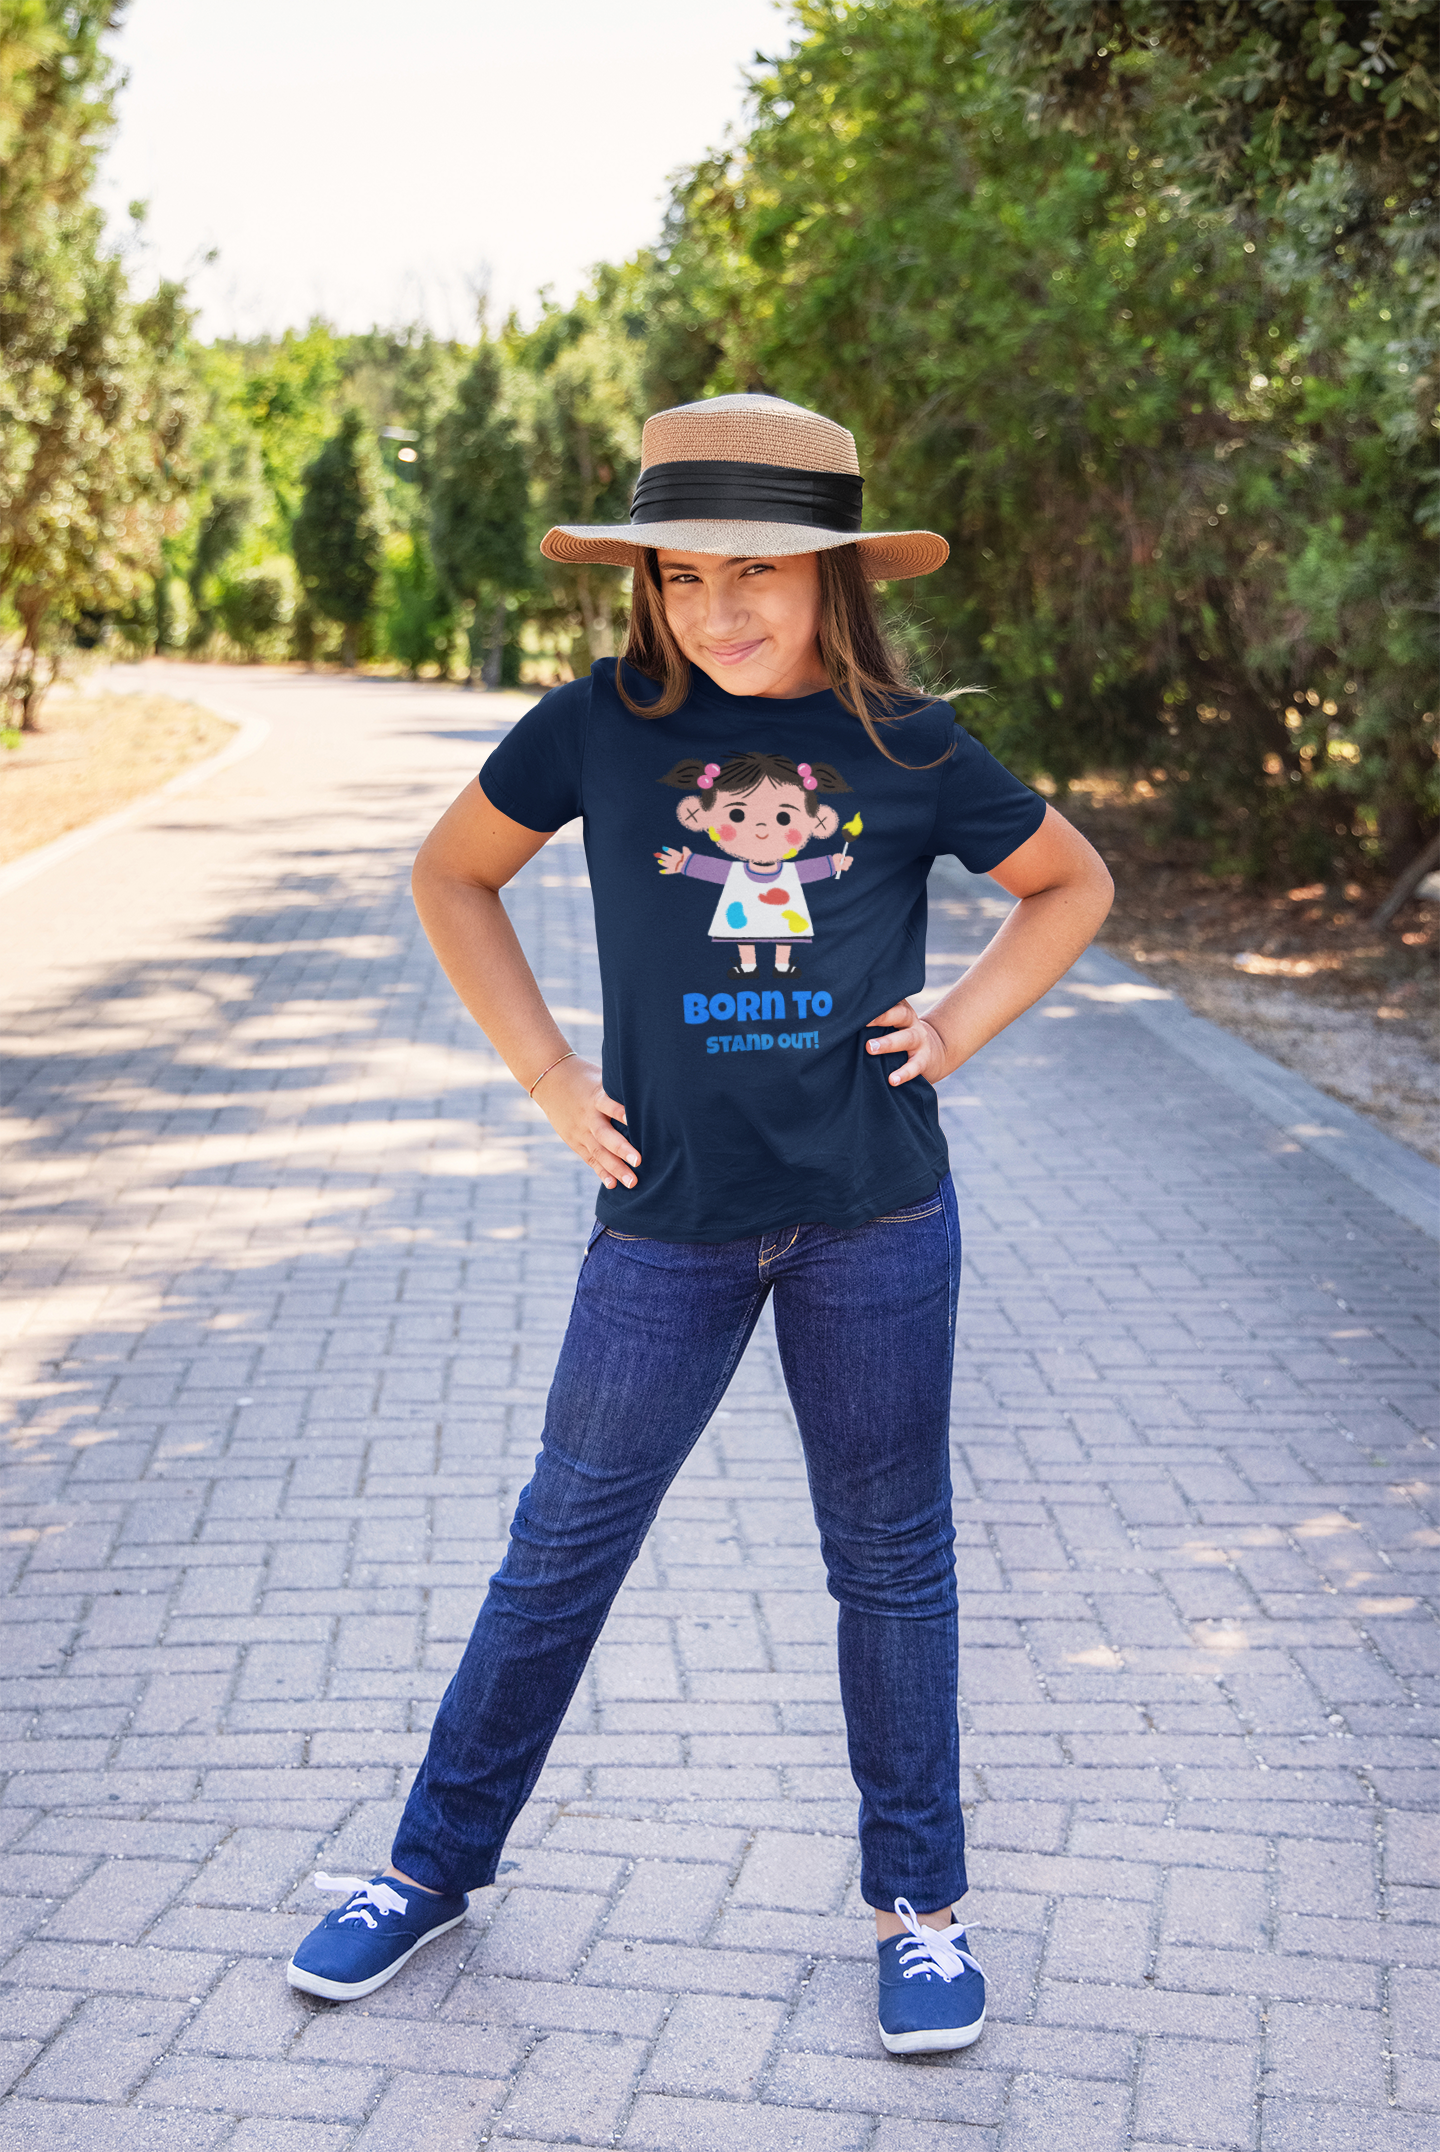 born to stand out! Printed navy blue Kids T-shirts